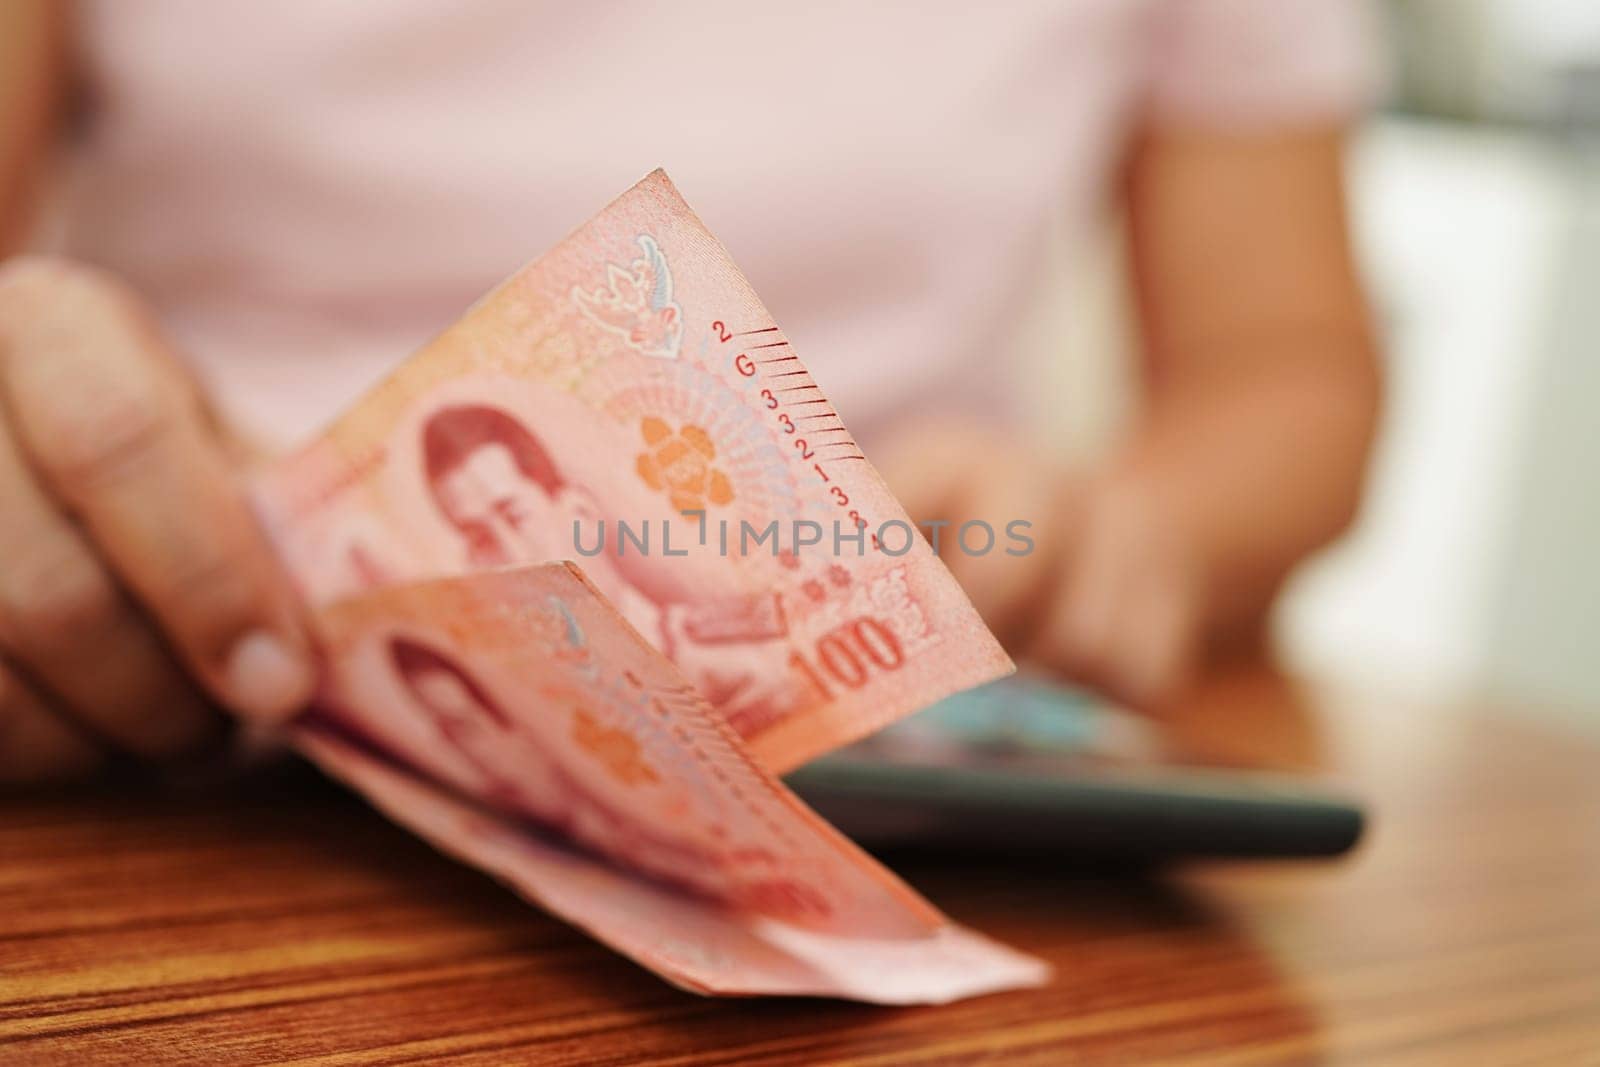 Asian woman counting Thai baht banknote money and holding in hand, investment economy, accounting business and banking.